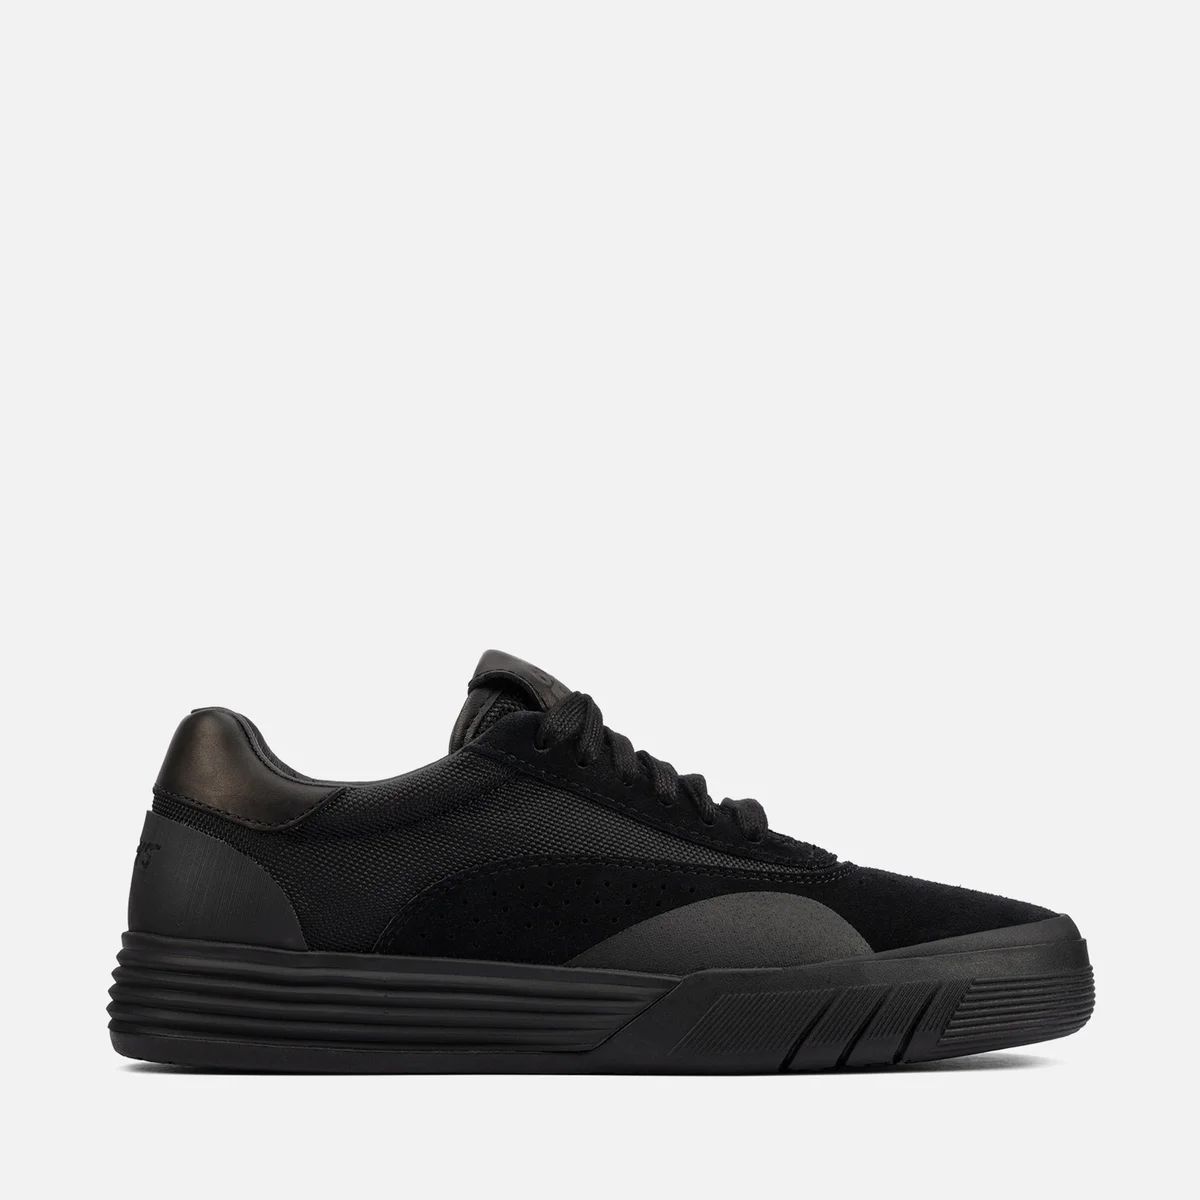 Clarks Youth Cica Trainers - Black Suede Image 1